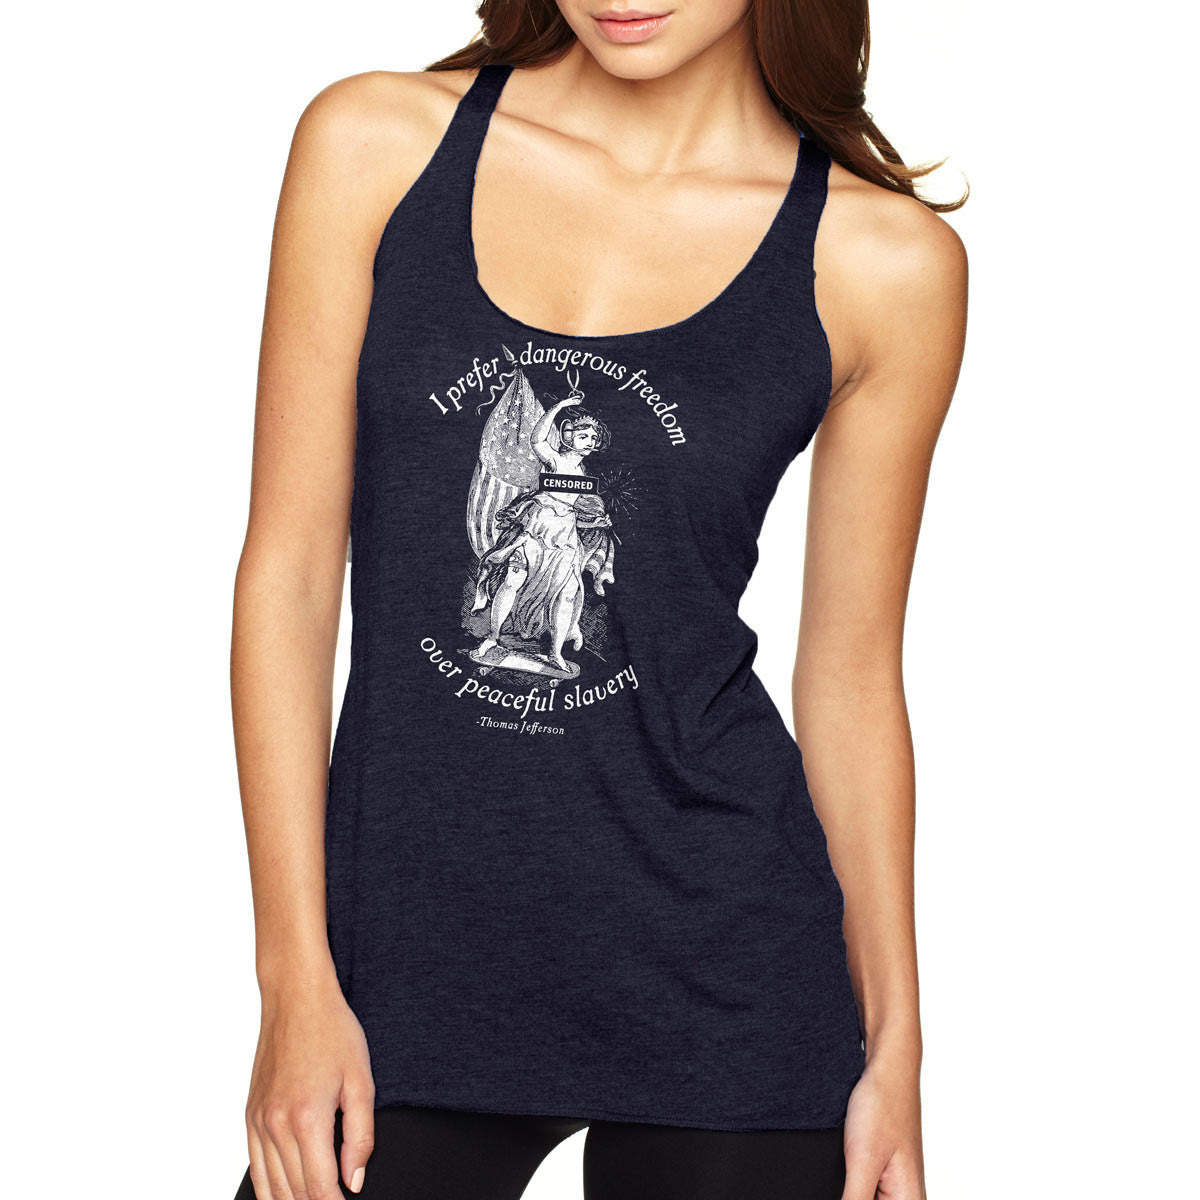 Ladies Tank Tops | Casual Liberty - Workout Women and for Maniacs Tops